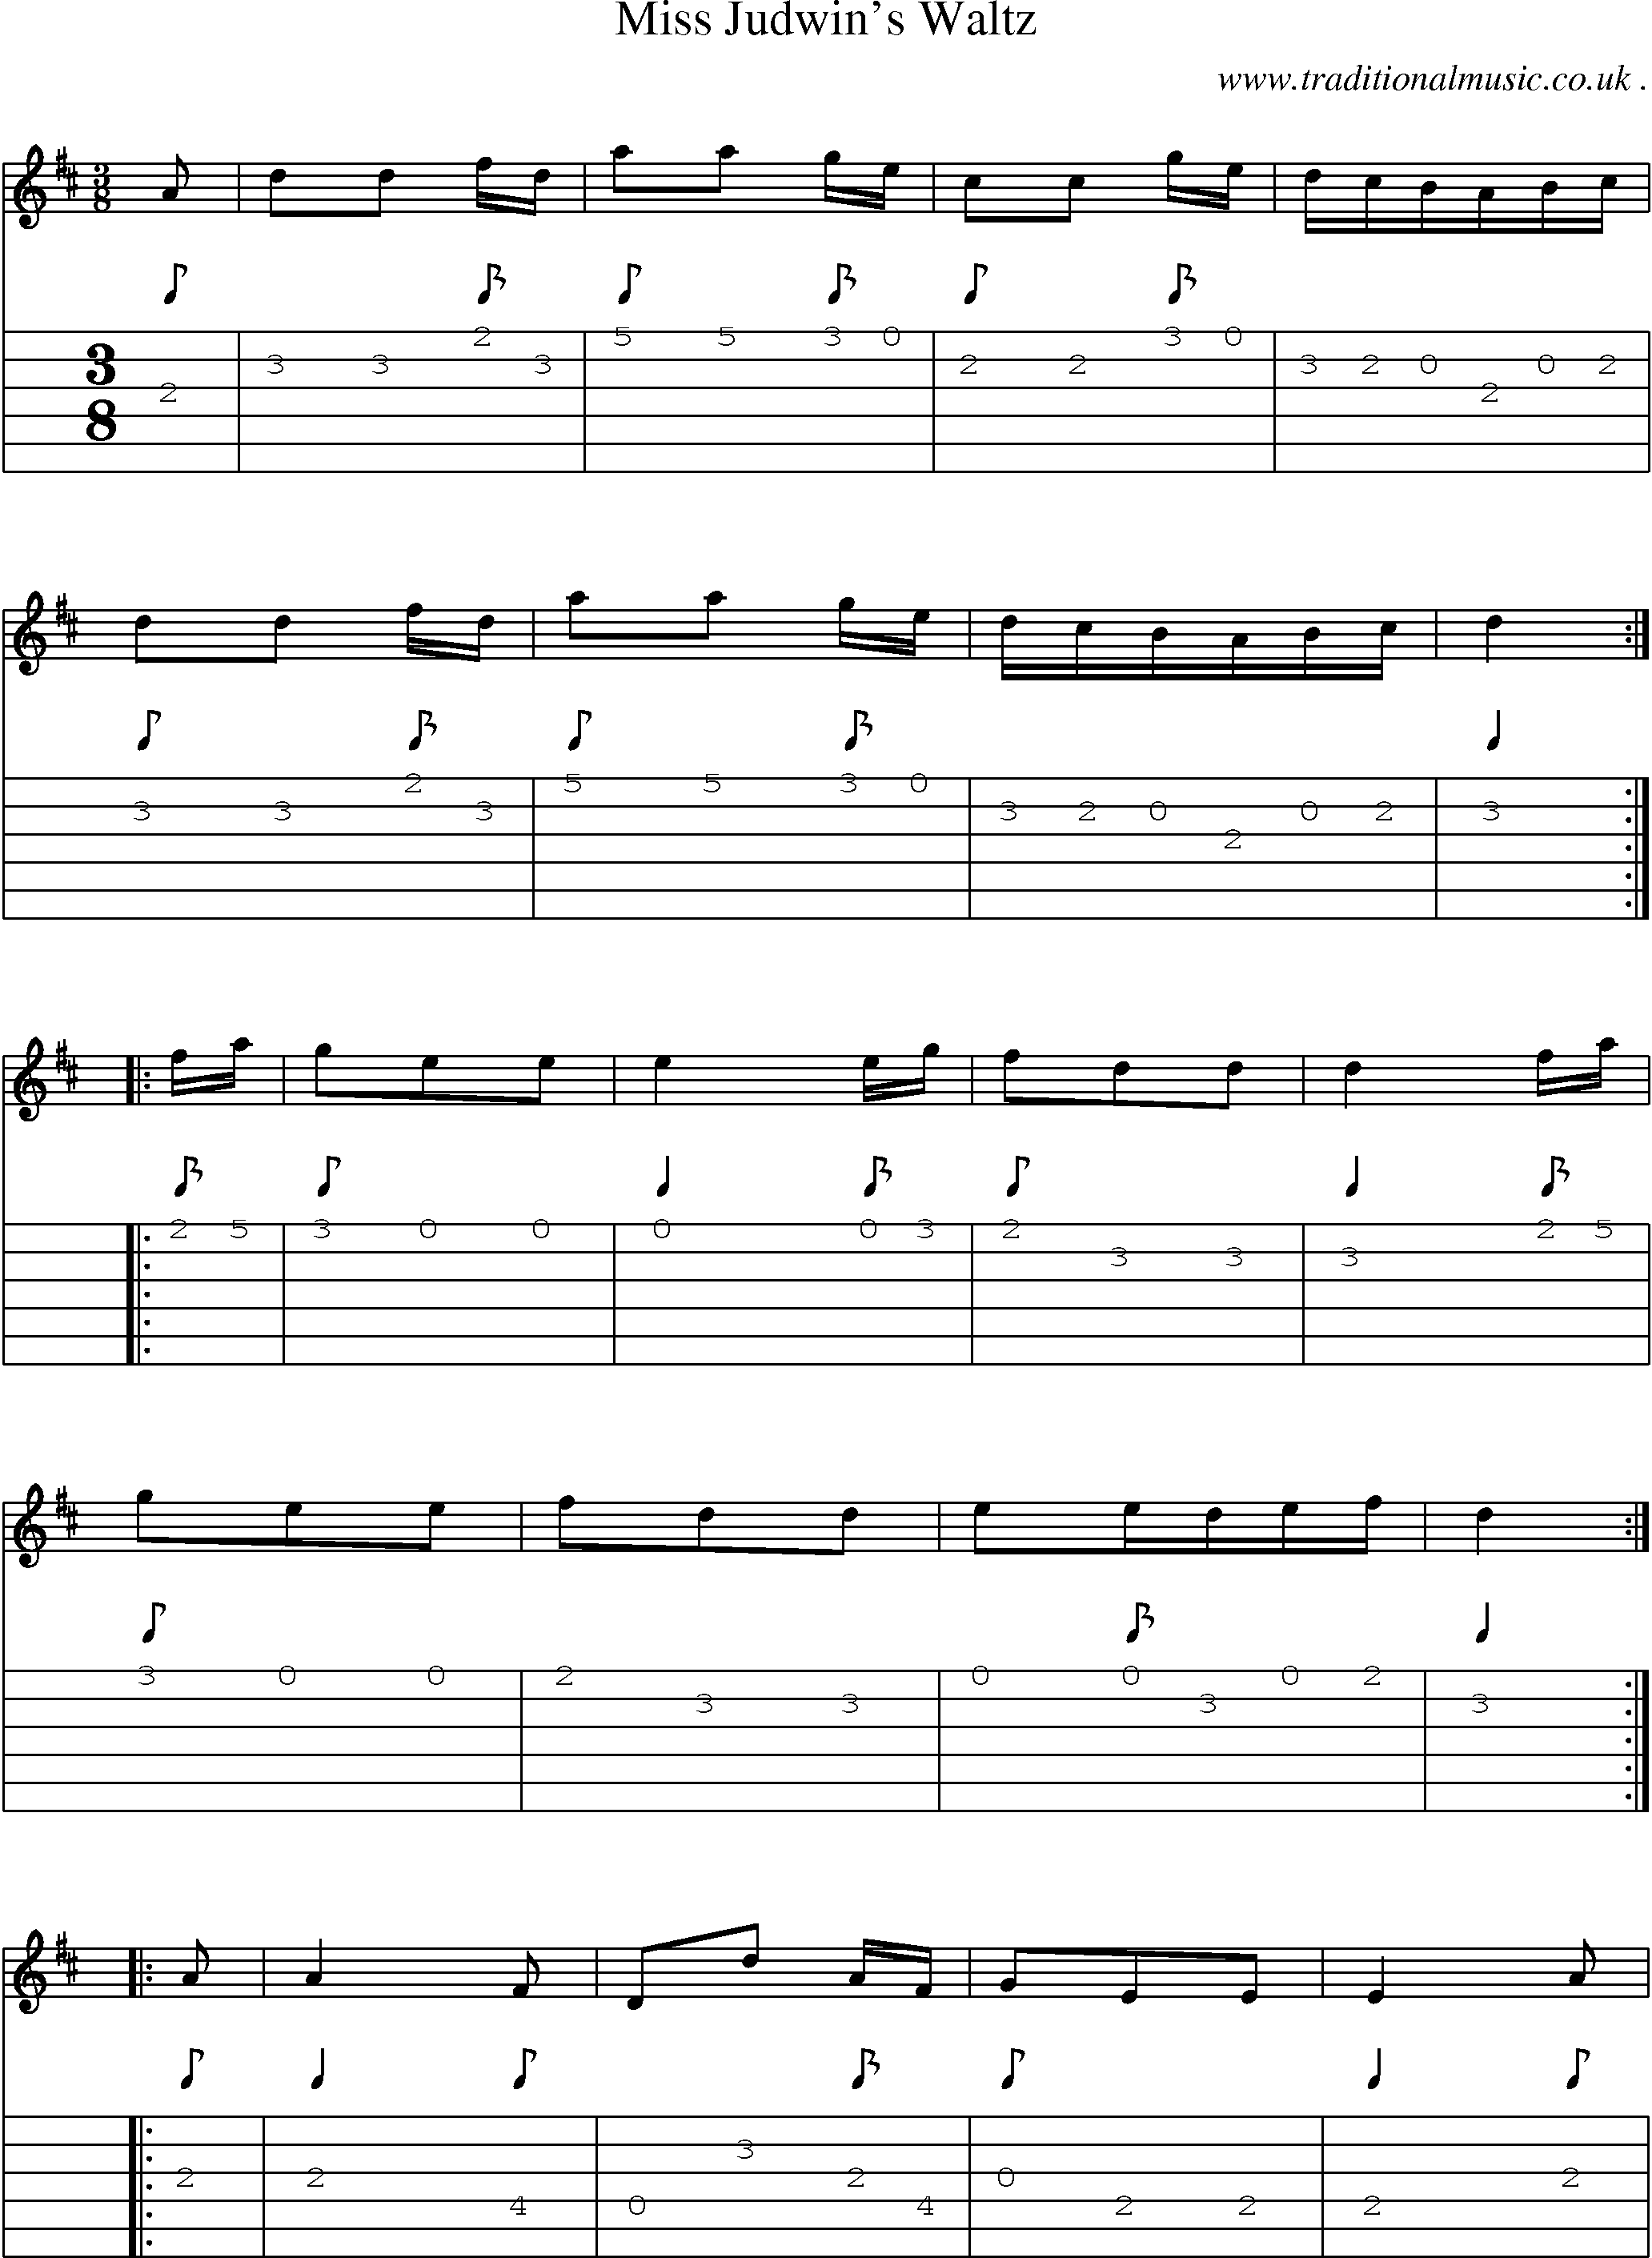 Sheet-Music and Guitar Tabs for Miss Judwins Waltz